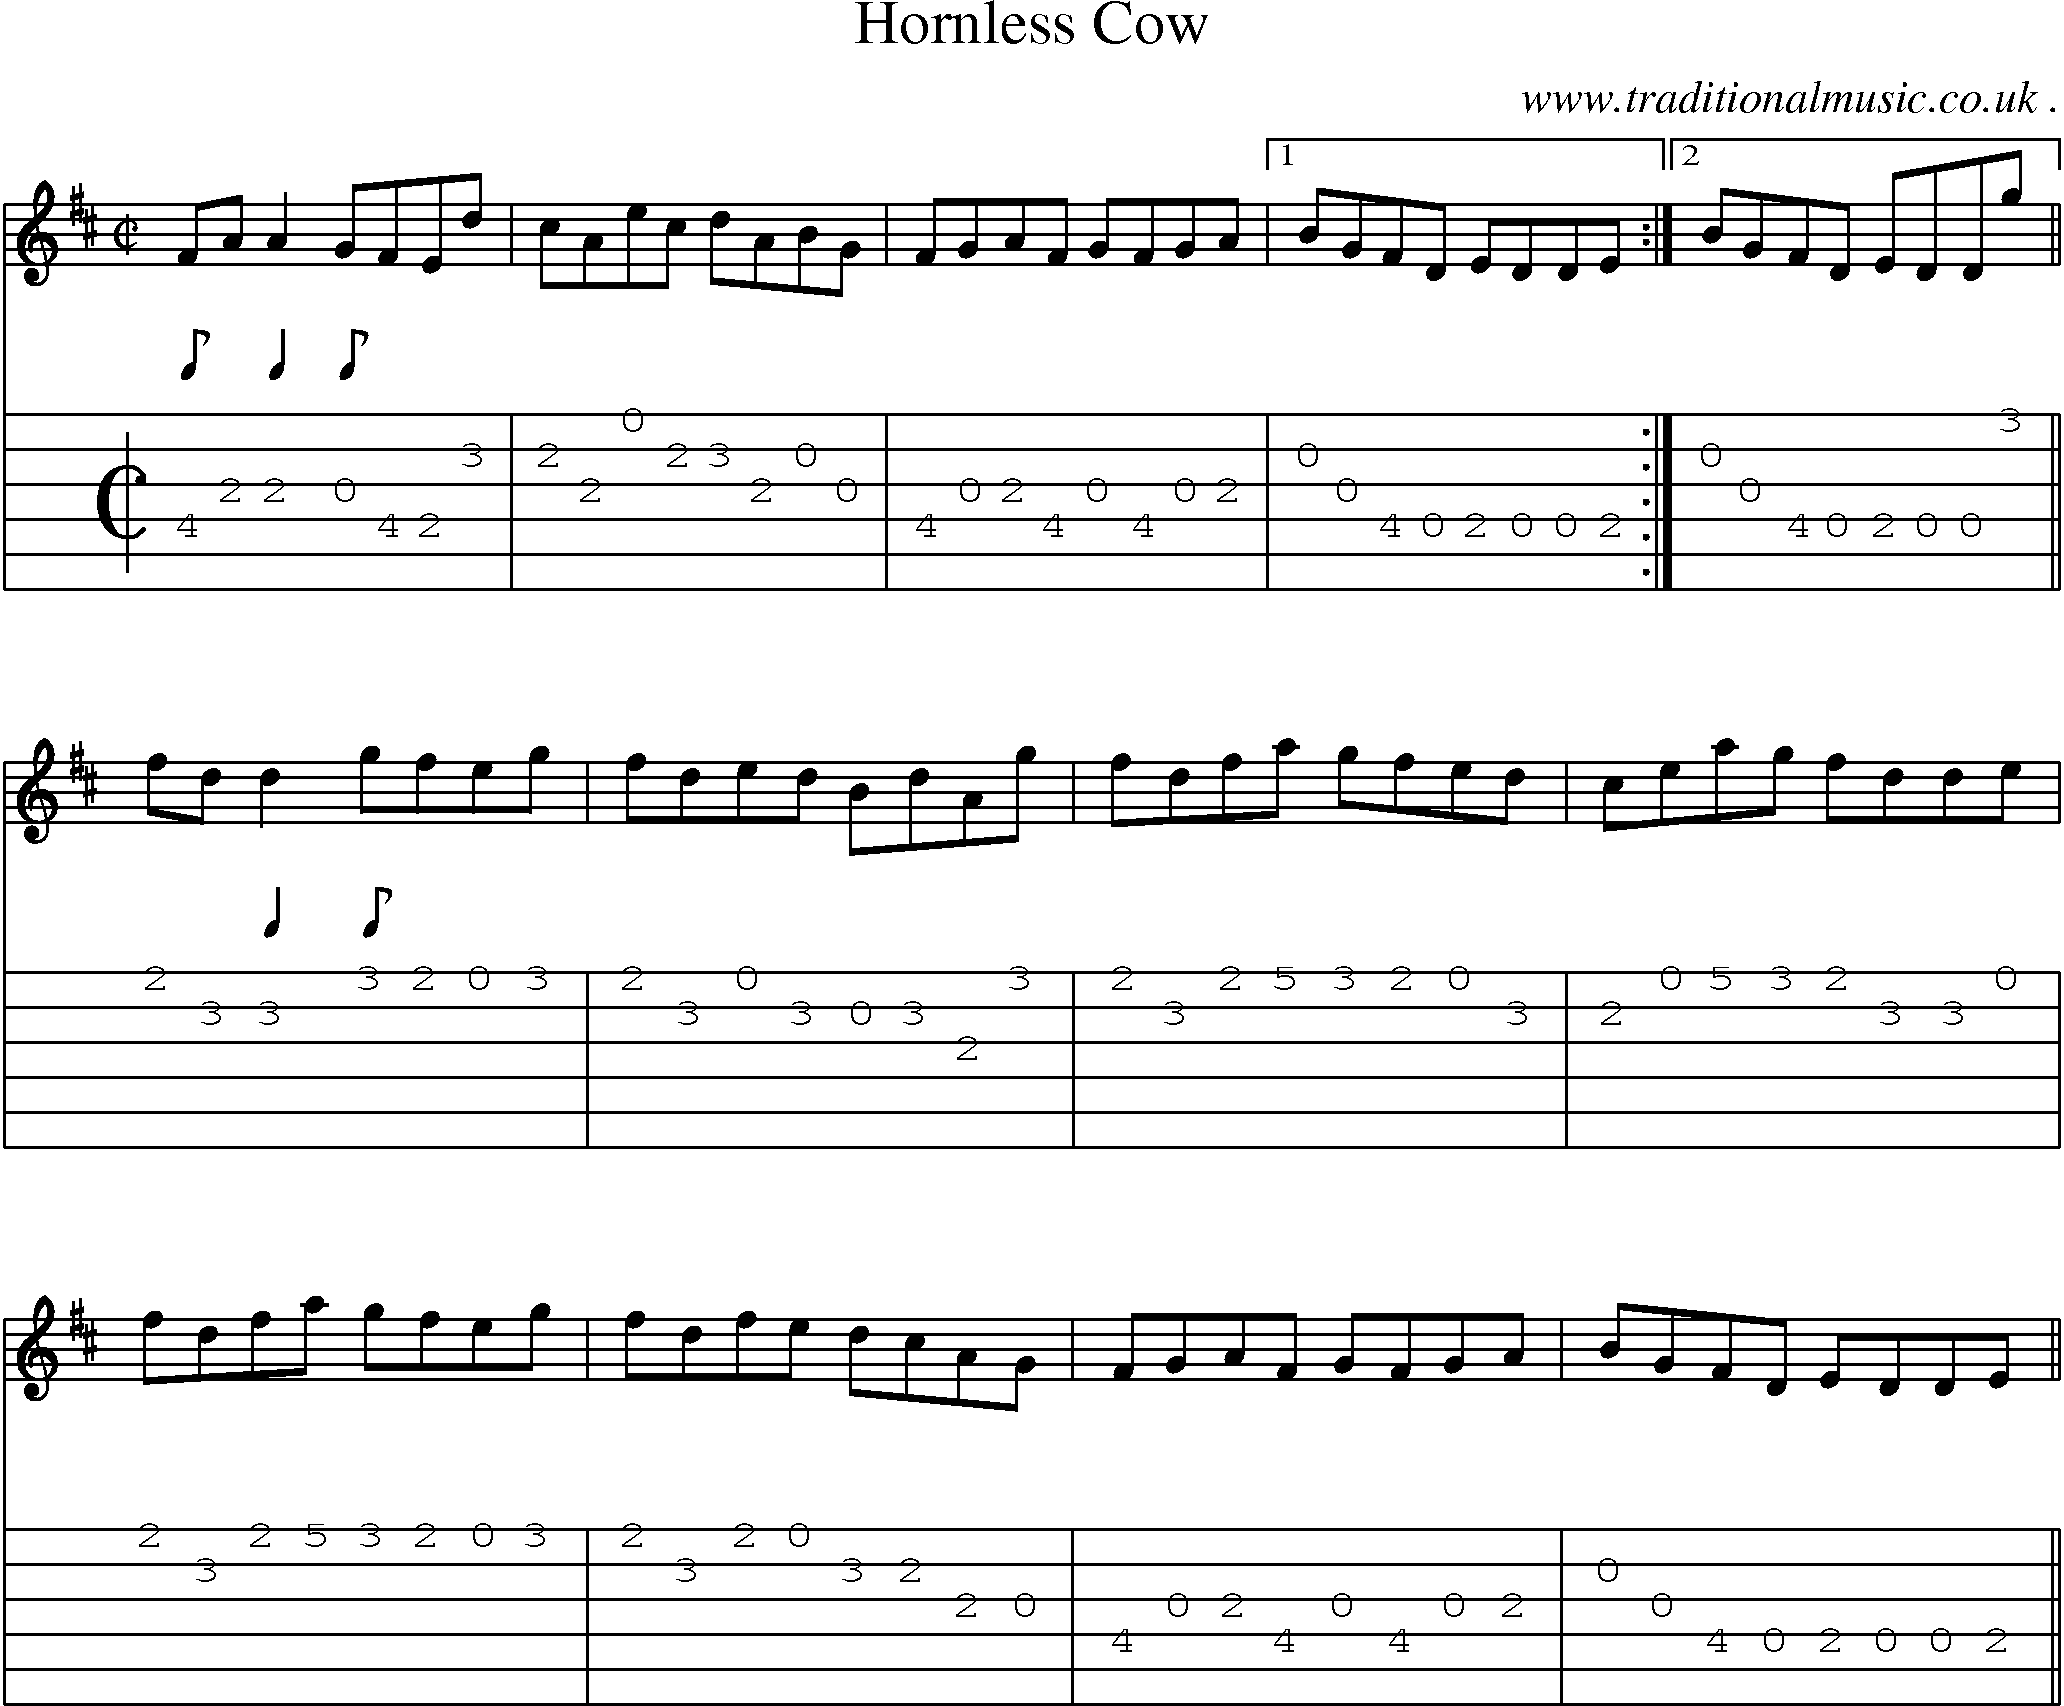 Sheet-Music and Guitar Tabs for Hornless Cow